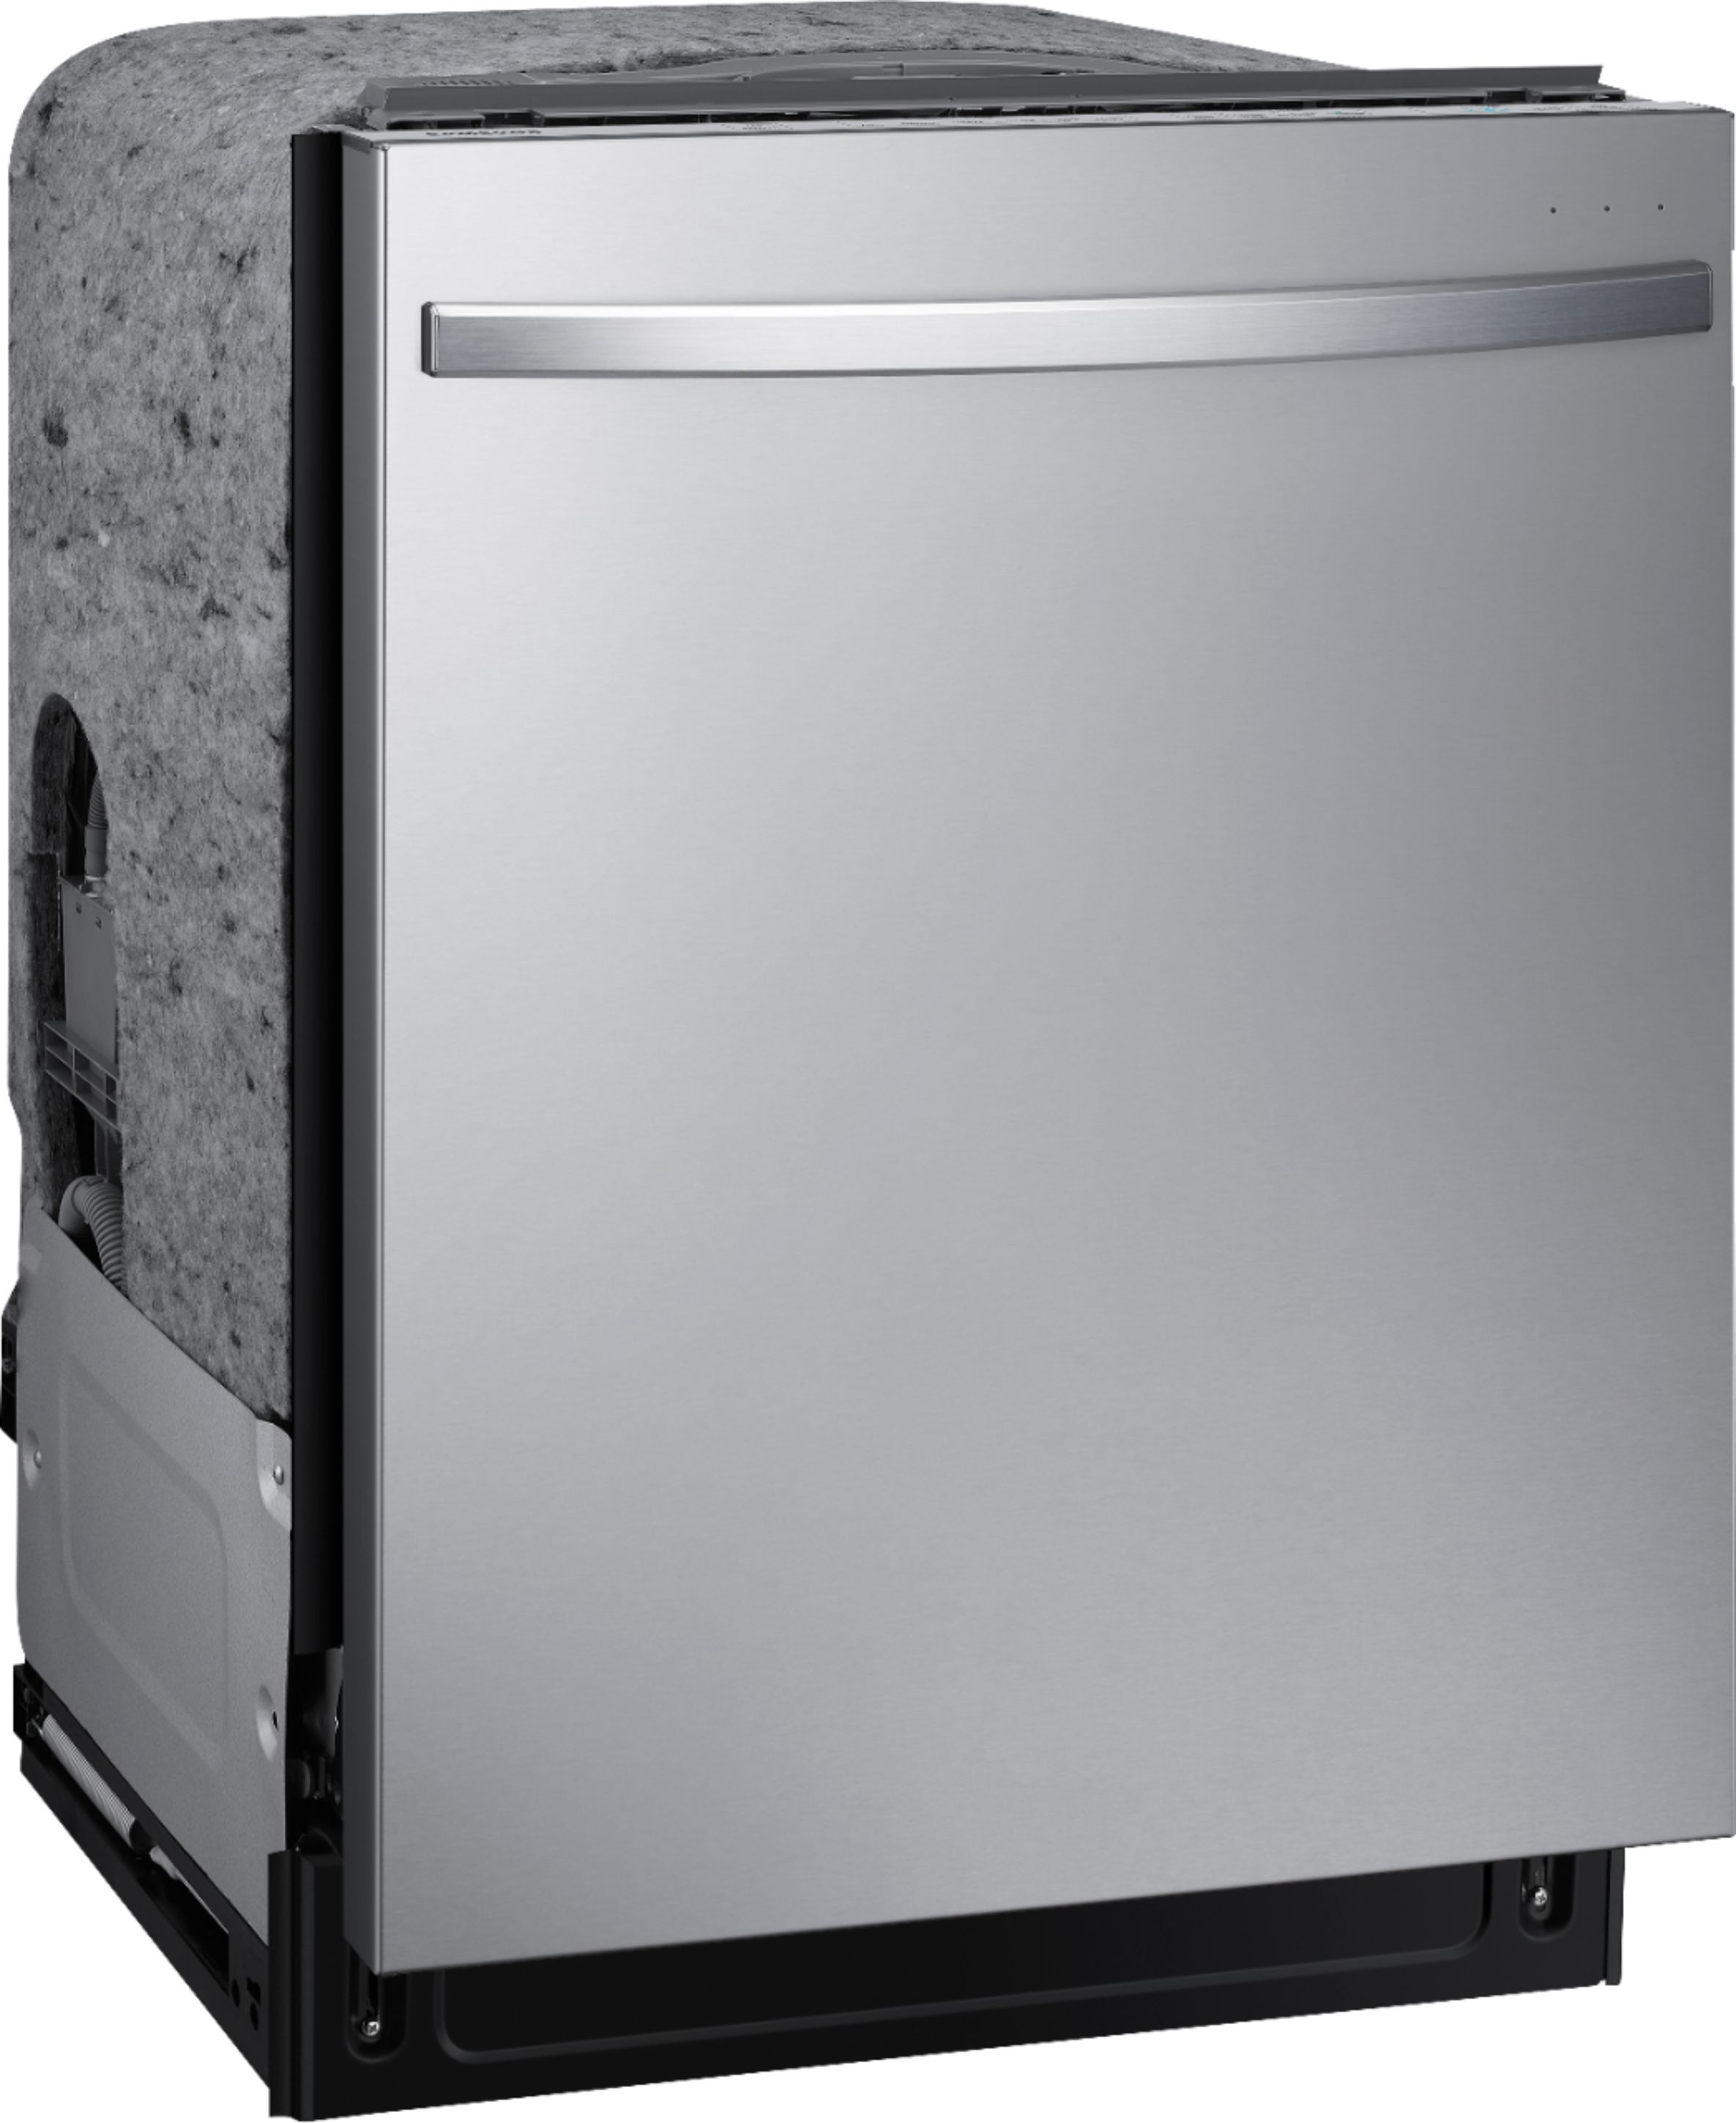 Samsung - WaterWall 24 Built-In Dishwasher - Stainless Steel AR-0022 -  Appliance Recovery